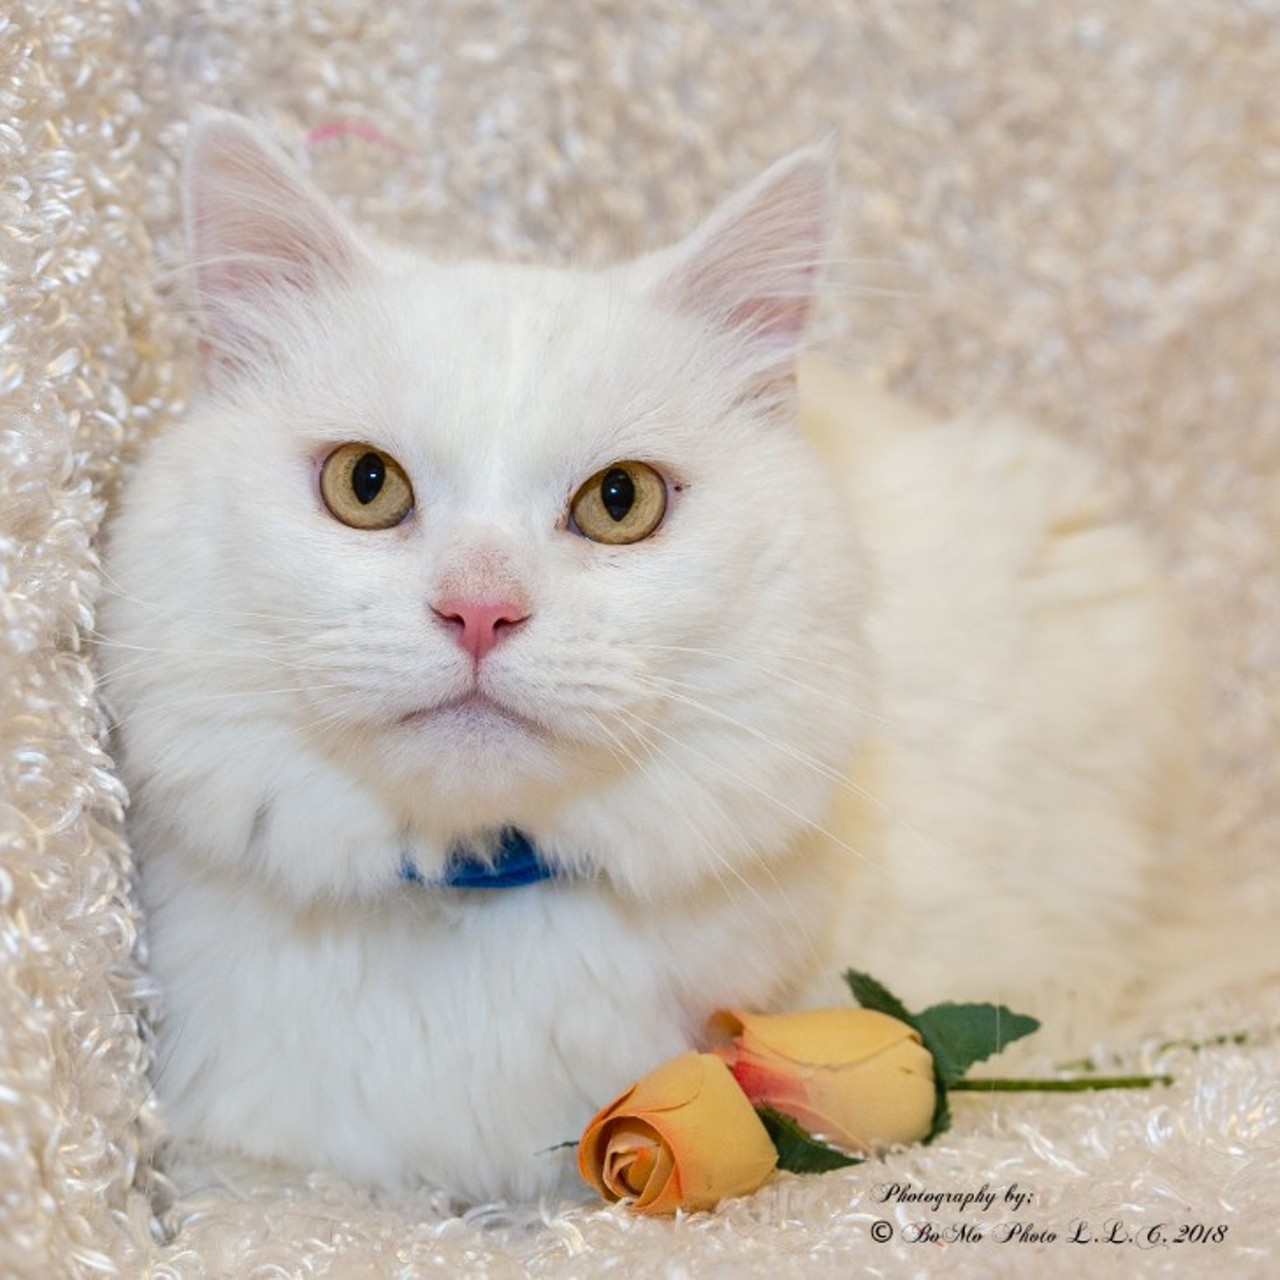 NAME: Forrest
GENDER: Male
BREED: Domestic Longhair
AGE: 6 years, 1 month
WEIGHT: 10 pounds
SPECIAL CONSIDERATIONS: Forrest may be deaf.
REASON I CAME TO MHS: Owner surrender
LOCATION: Petco of Sterling Heights
ID NUMBER: 871888